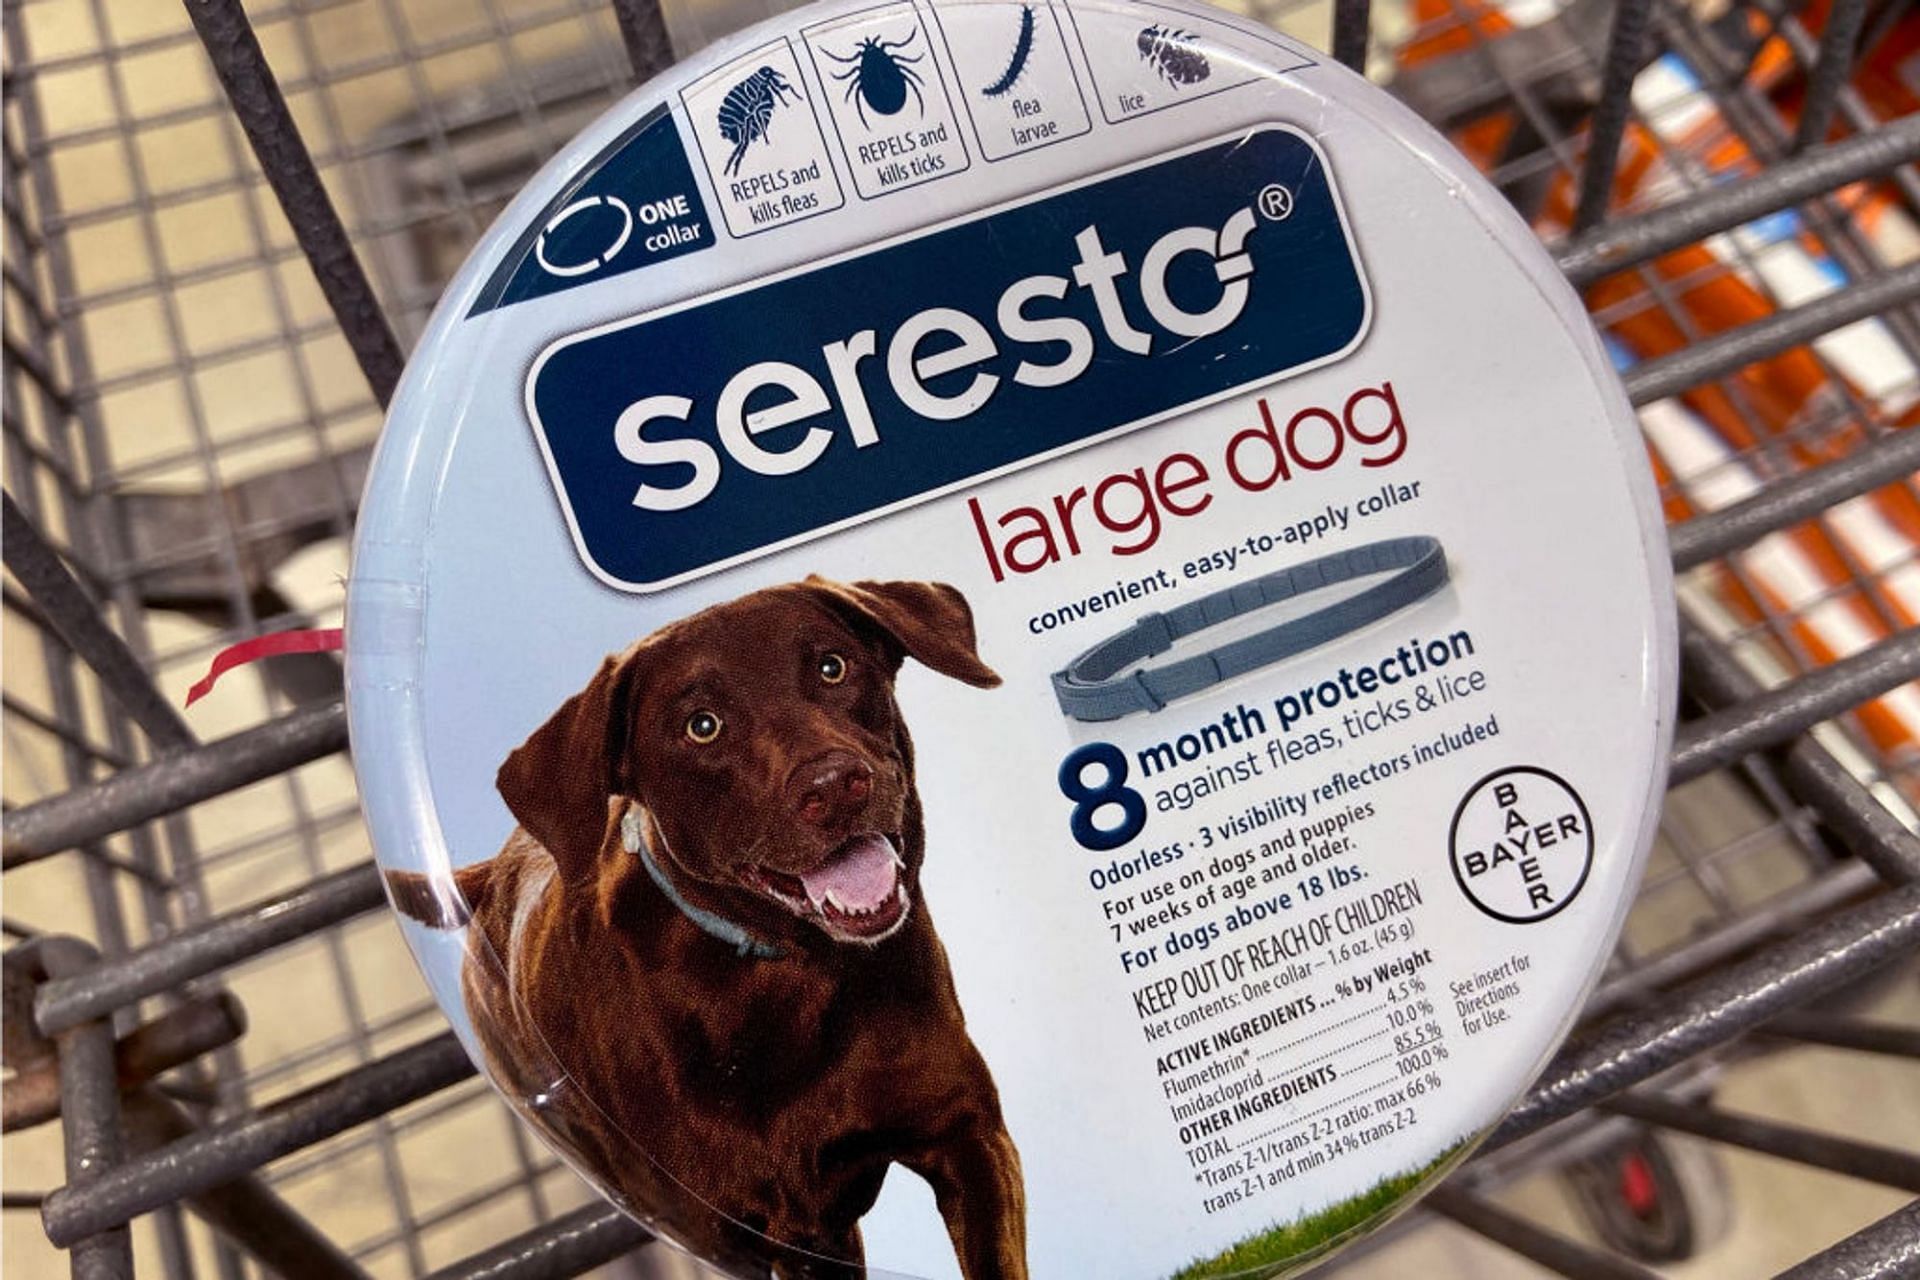 seresto-flea-collar-recall-2022-lawmakers-exercise-caution-after